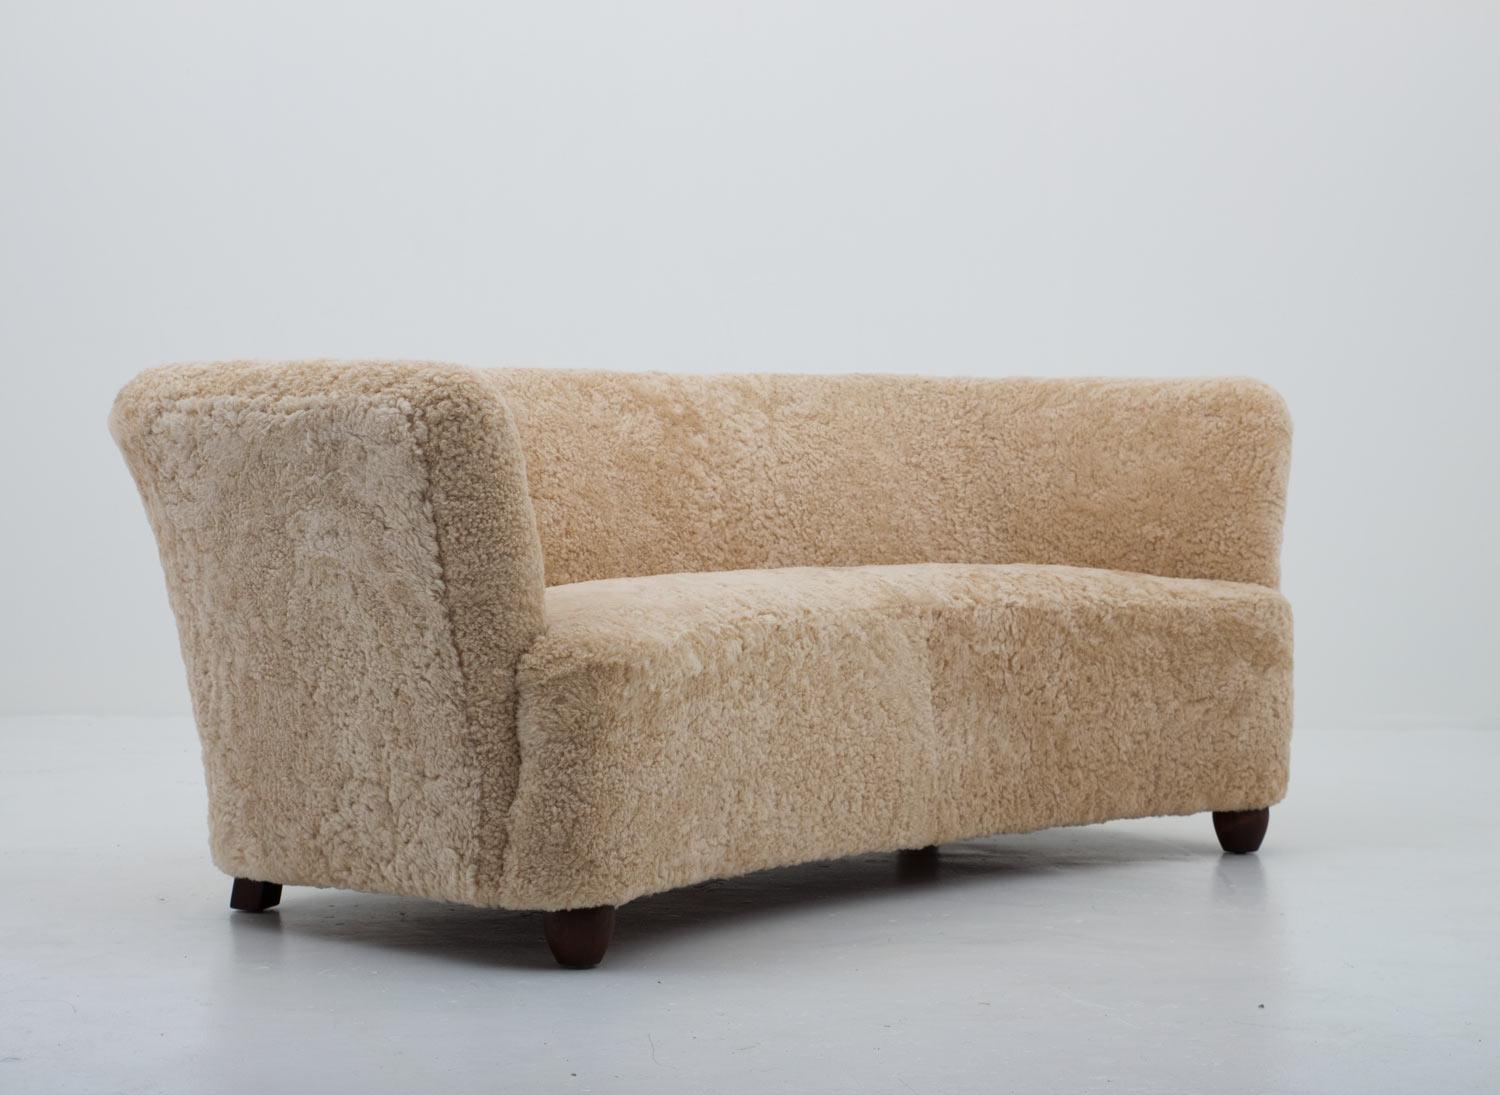 Stunning 3-seat sofa manufactured in Denmark, 1940s.
This organically shaped sofa is constructed with a very high sense of quality.
Since the backrest is less curved than the front, it would fit against a wall as well as stand free. Its quite